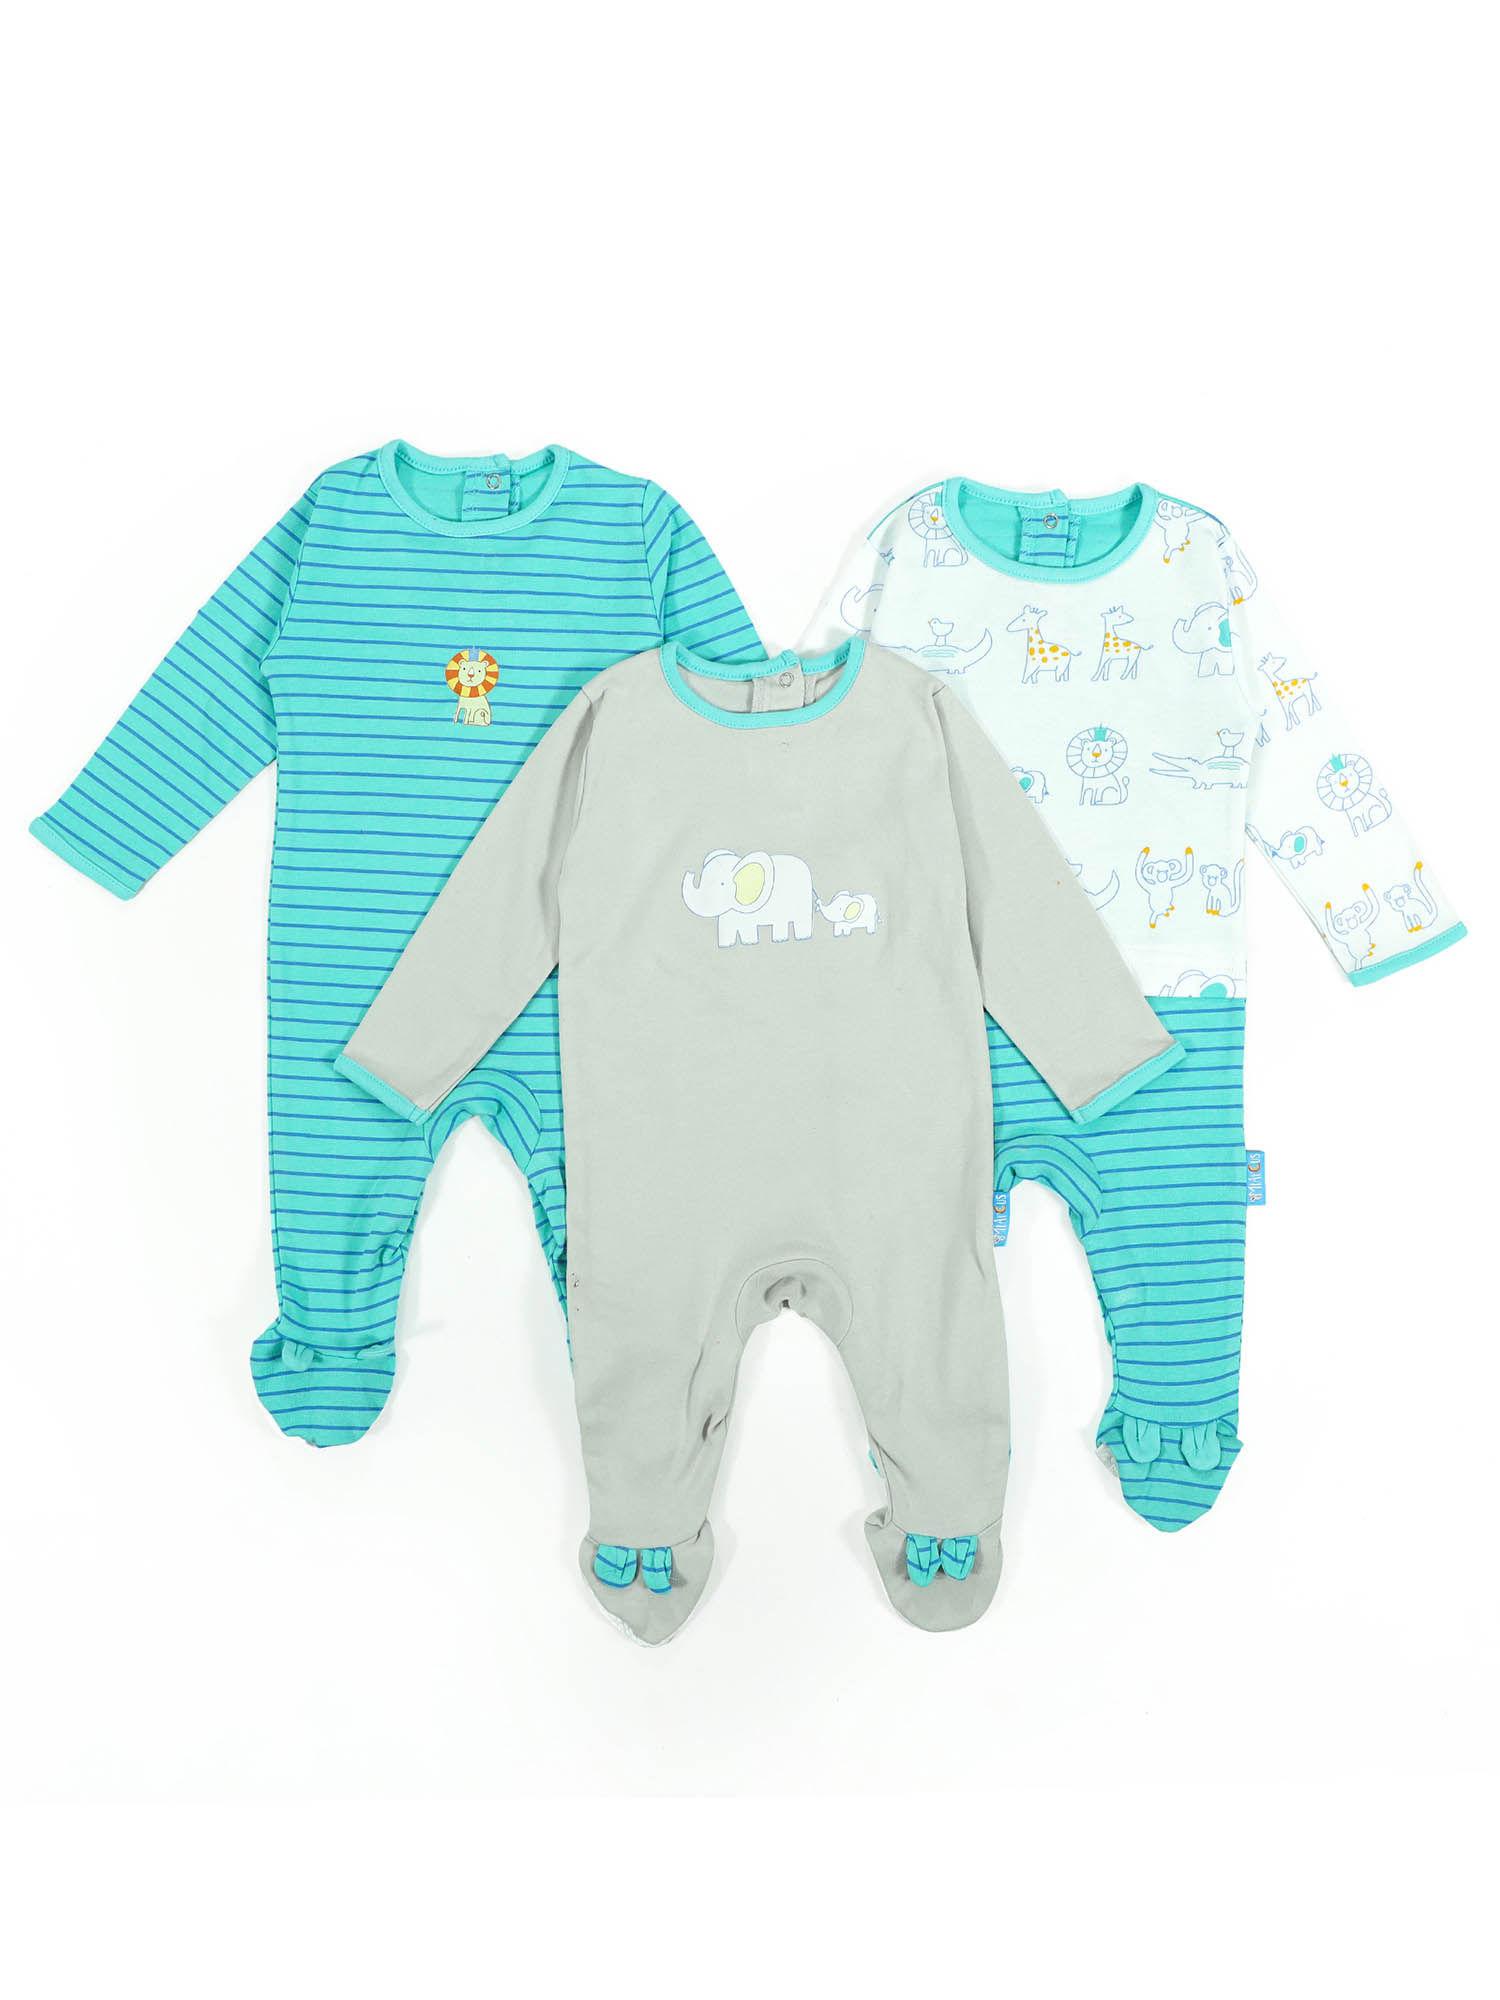 Baby Boy Comfy Knitted Sleep Suit - Safari (Pack of 3)